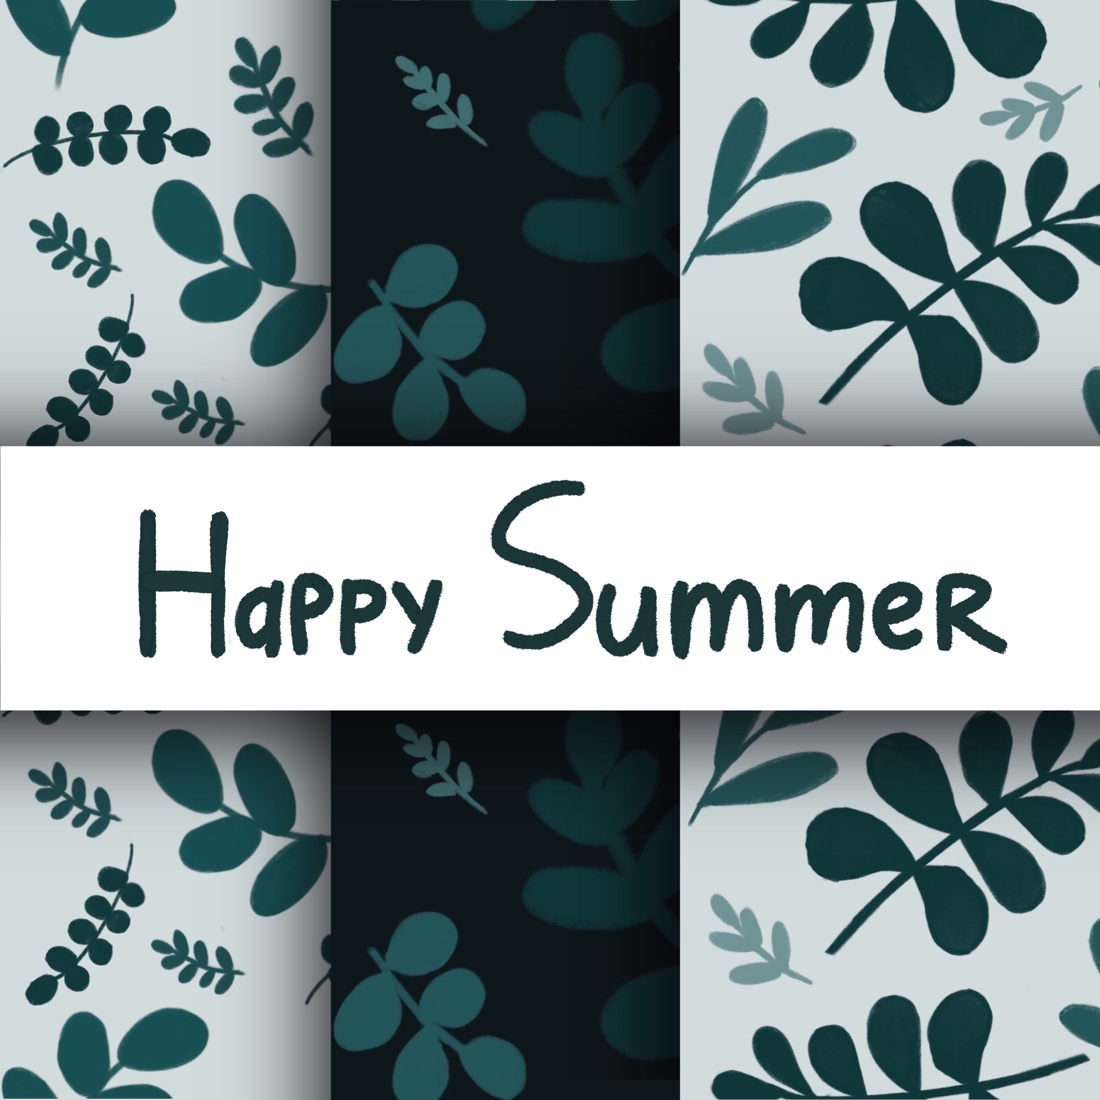 Happy Summer Pattern Set image preview.